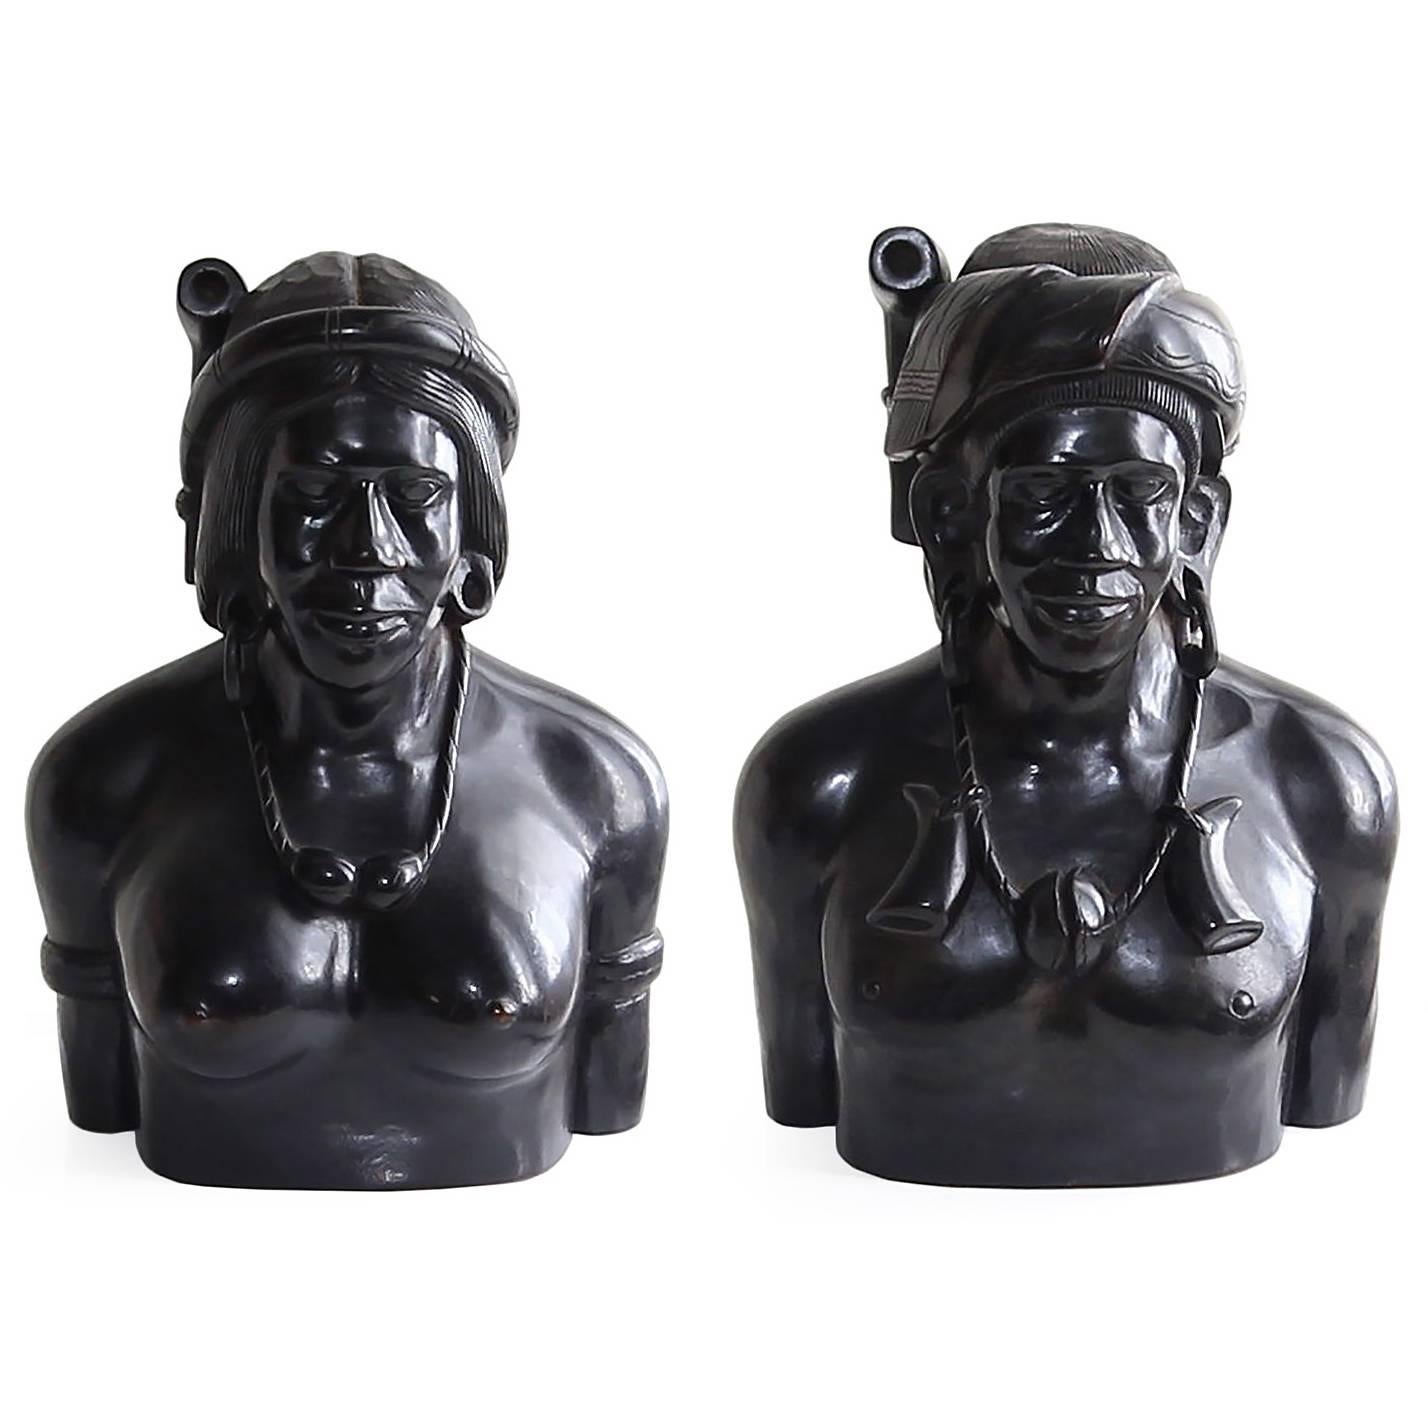 Incredible Pair of Hand-Carved Wood Bust Sculptures of Tribal Shaman Figures For Sale